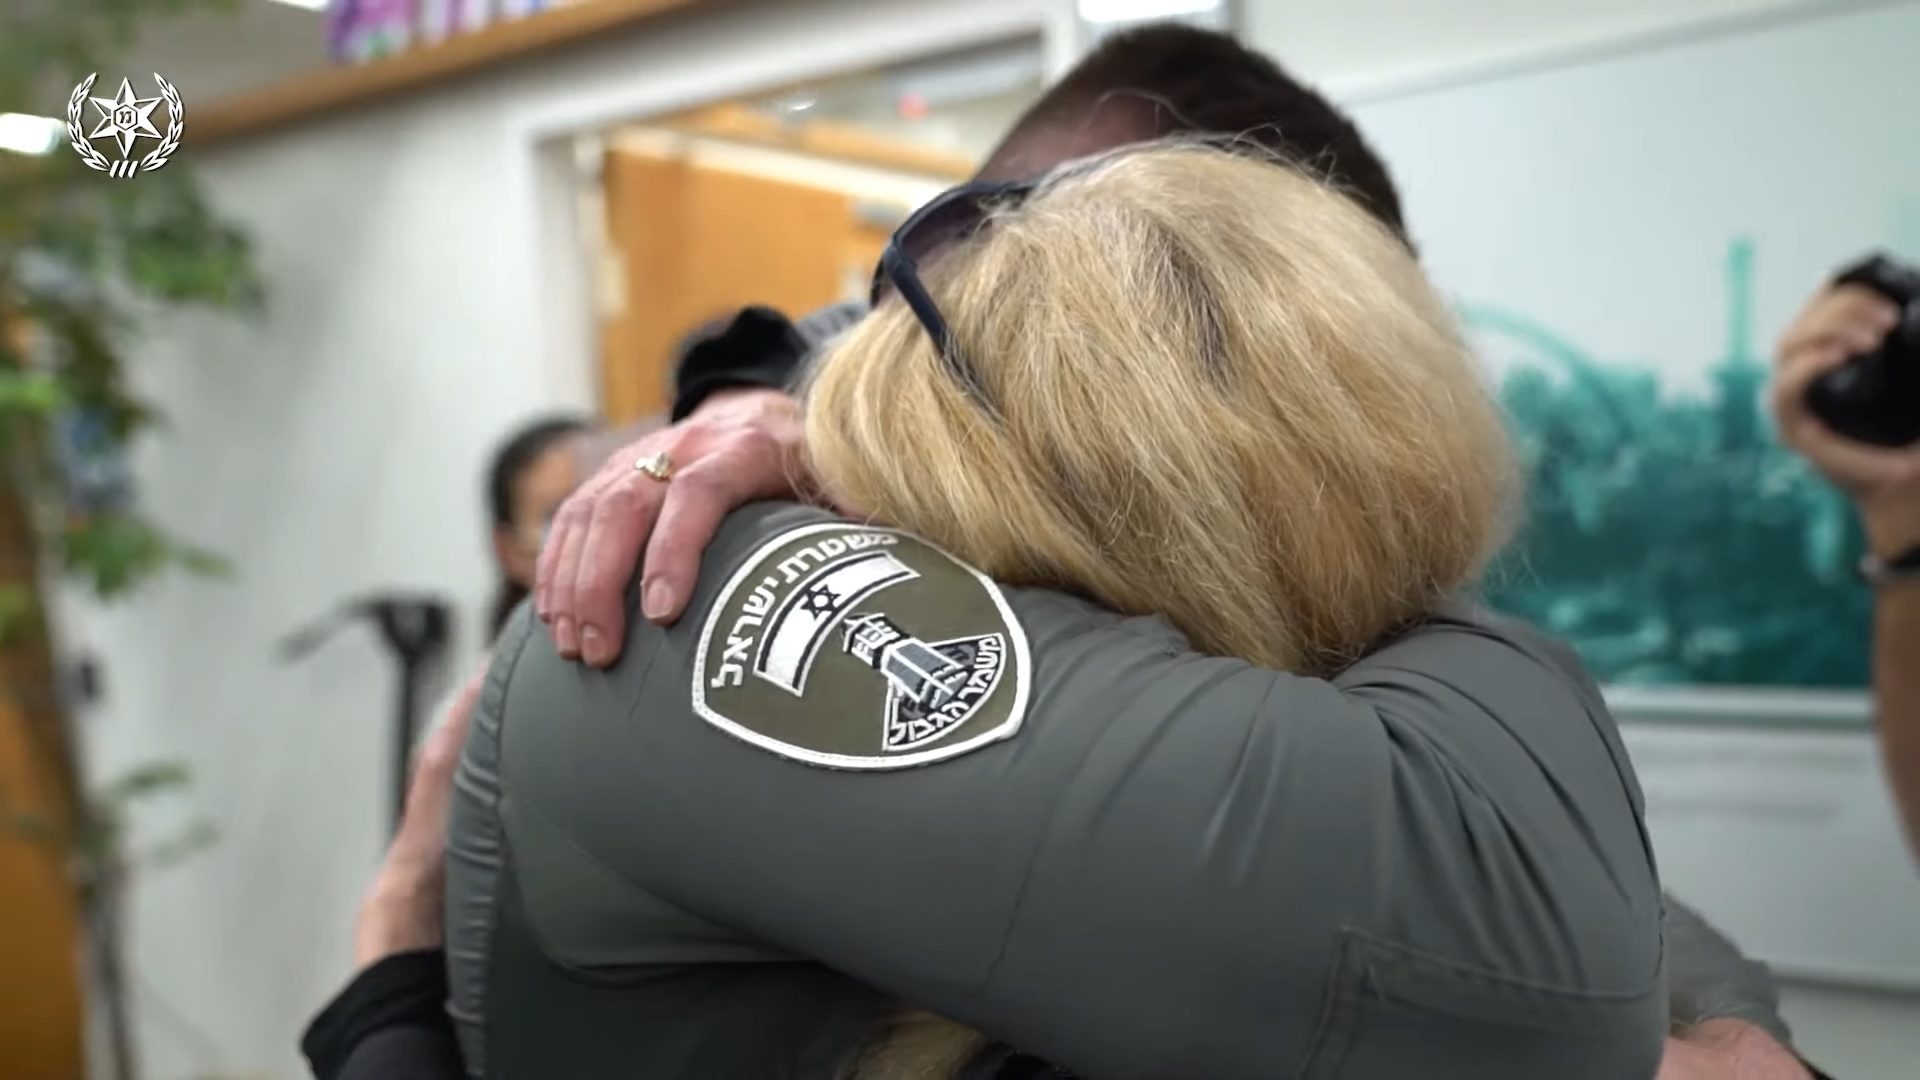 Israel Border Police Officer Reunites With Family After Their Escape From Ukraine (with VIDEO)